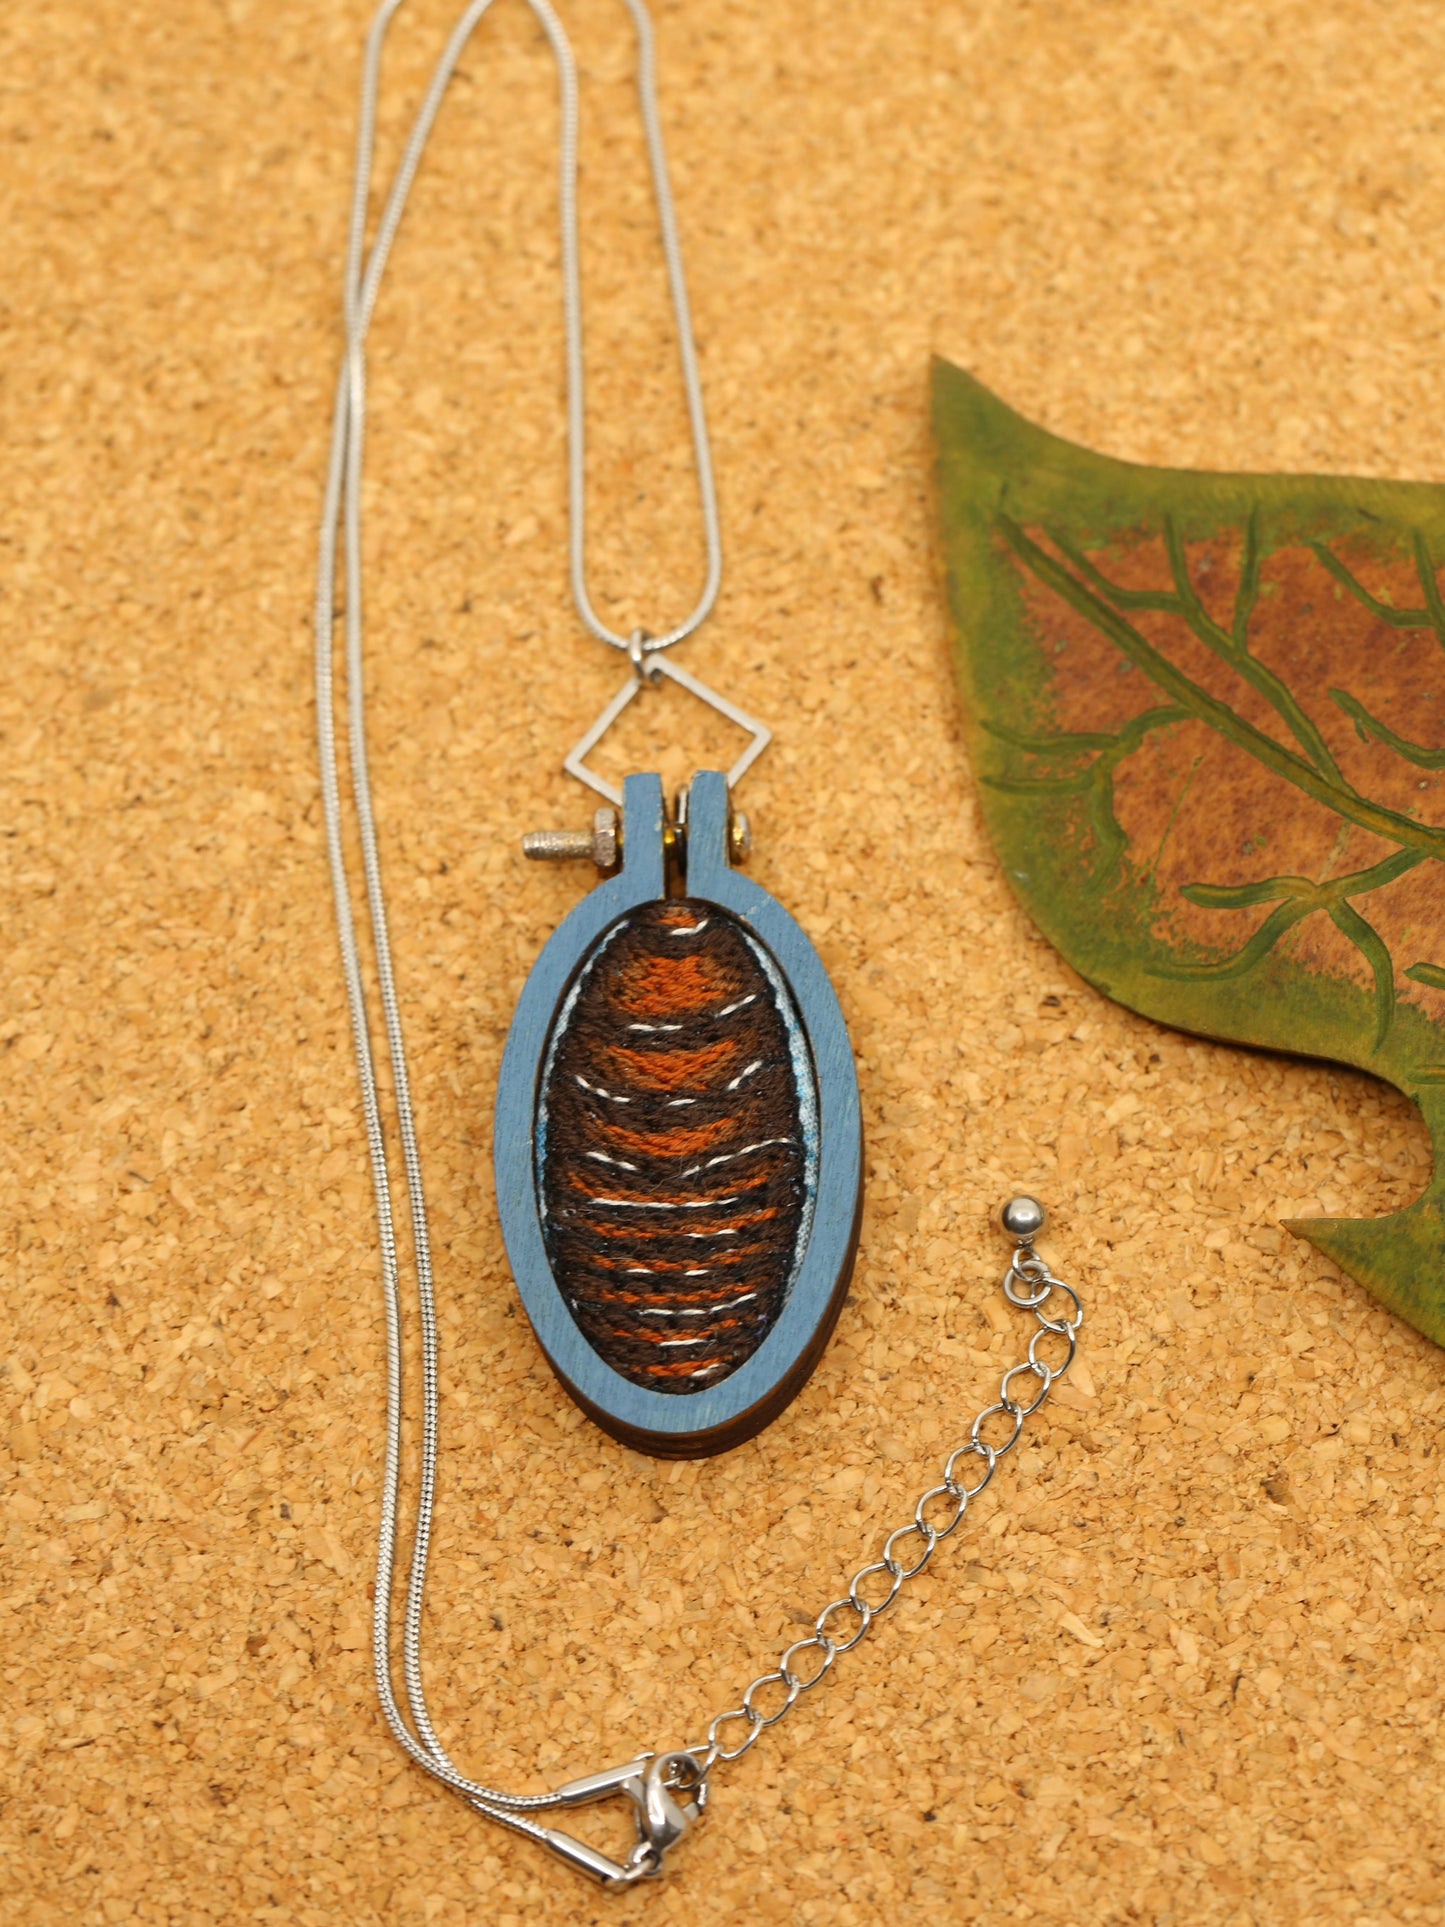 Burrowing cockroach embroidered necklace